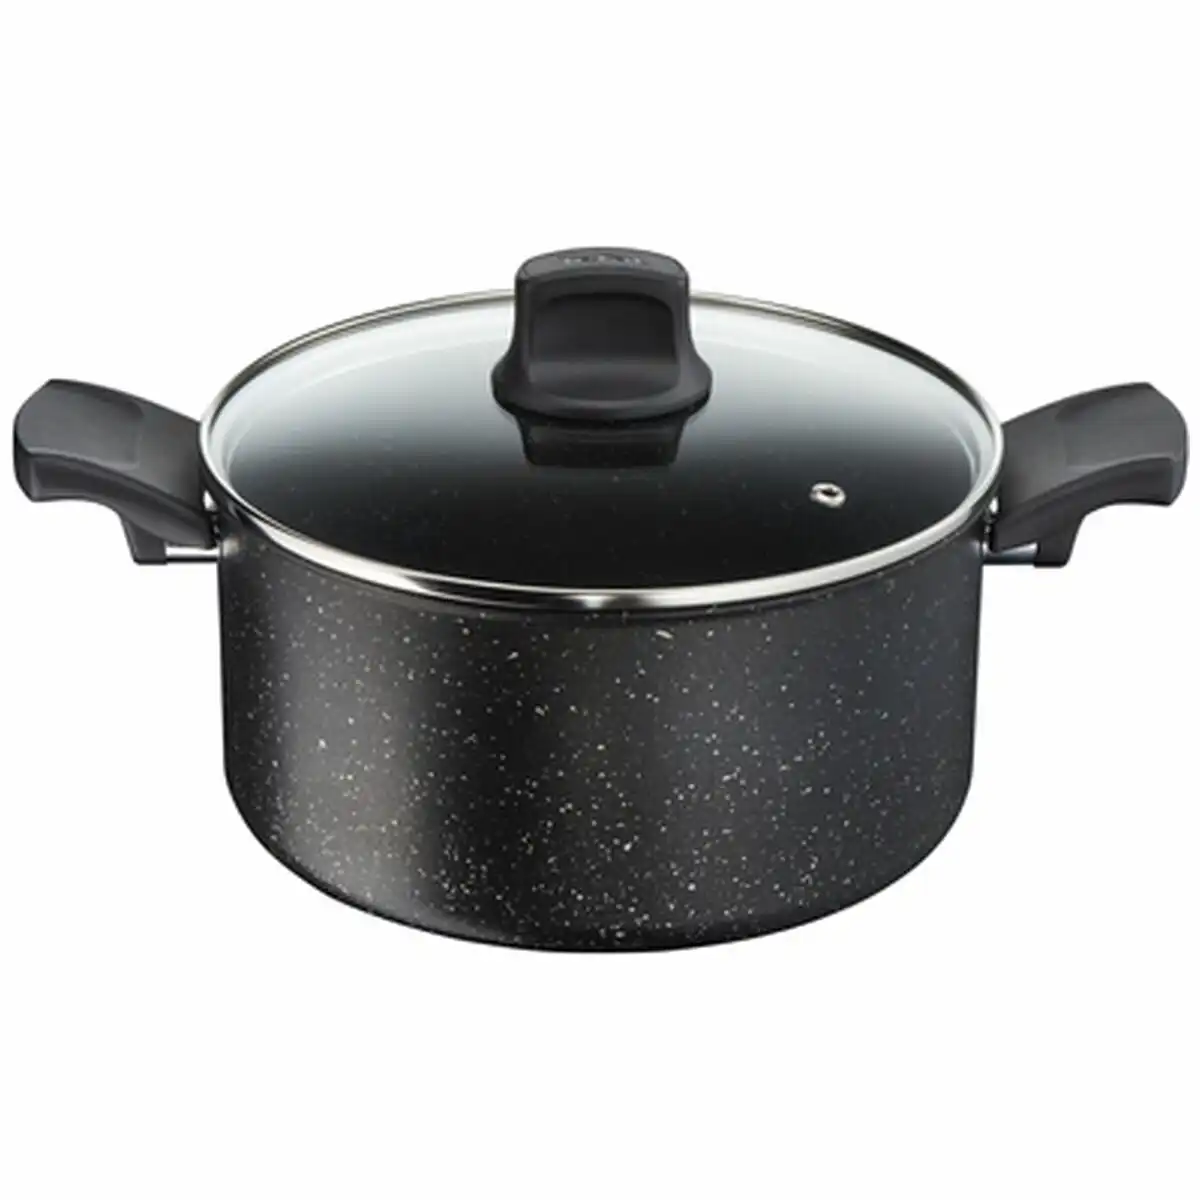 Tefal Everest 24cm Stewpot with Lid